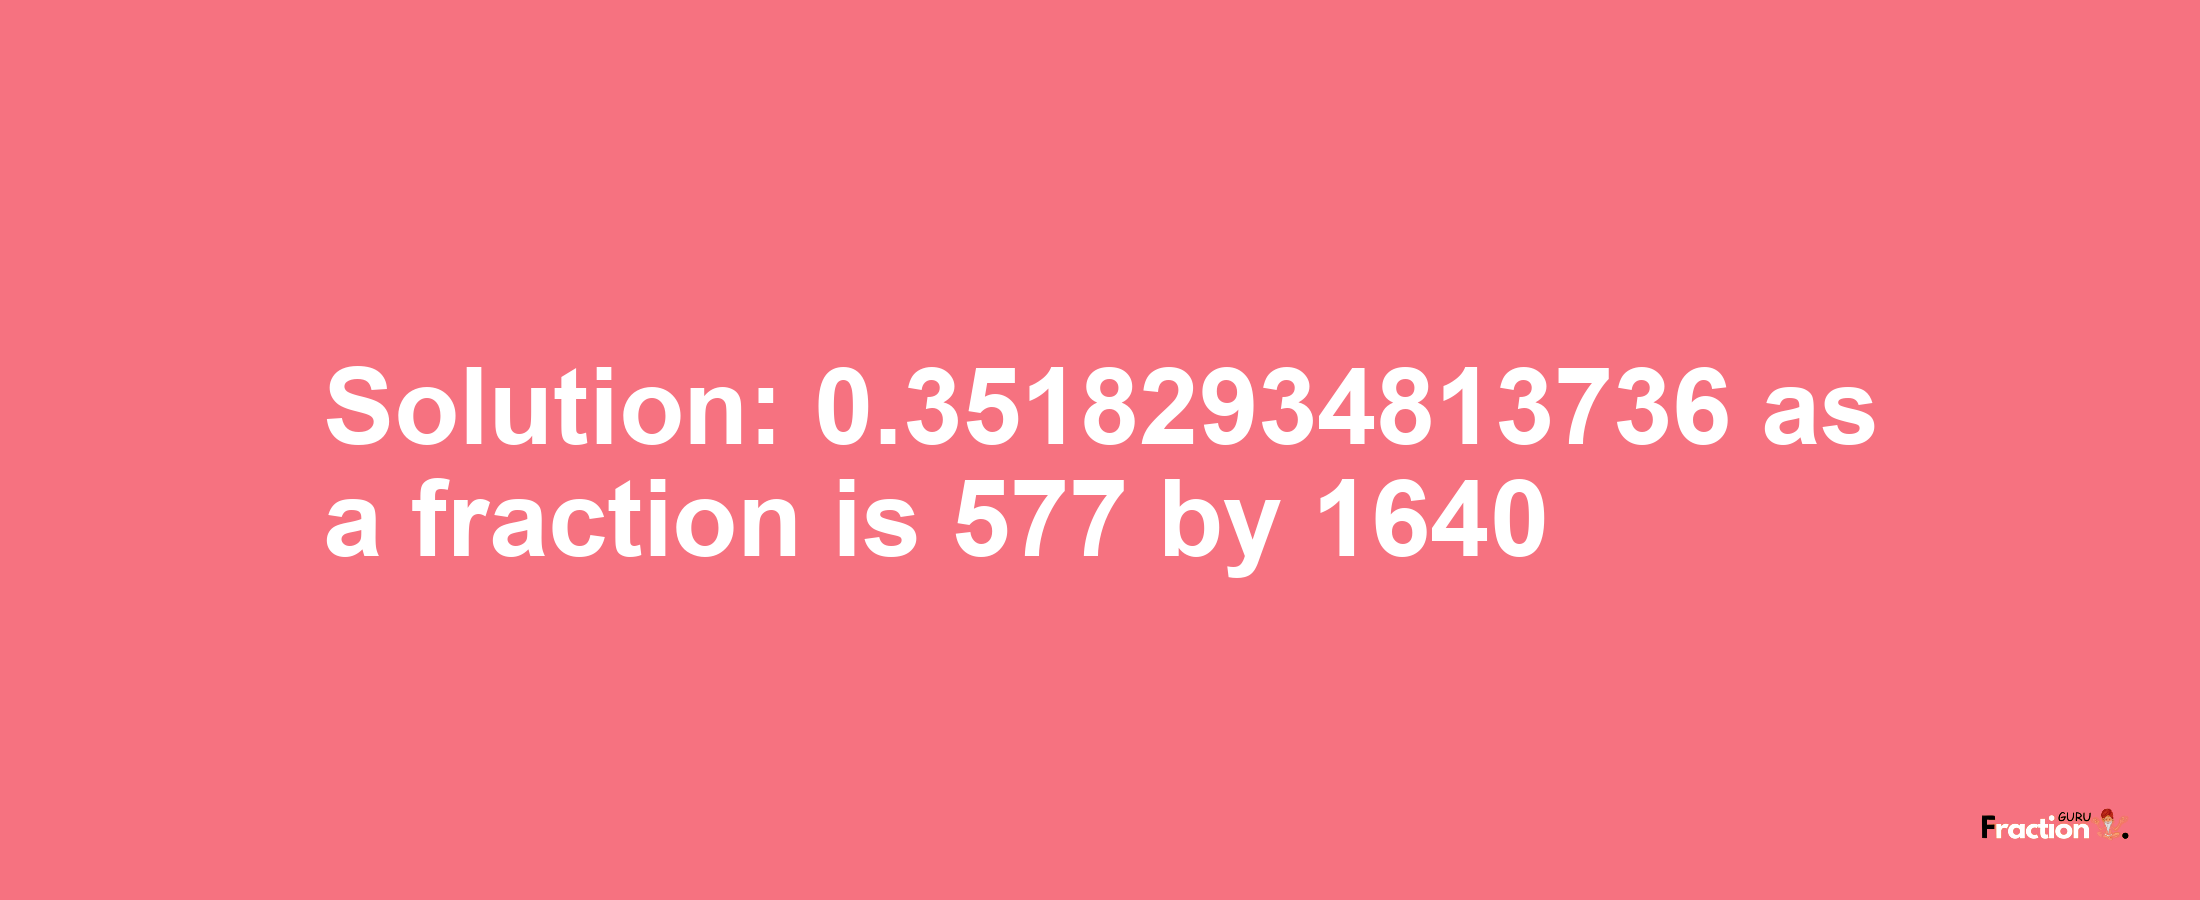 Solution:0.35182934813736 as a fraction is 577/1640